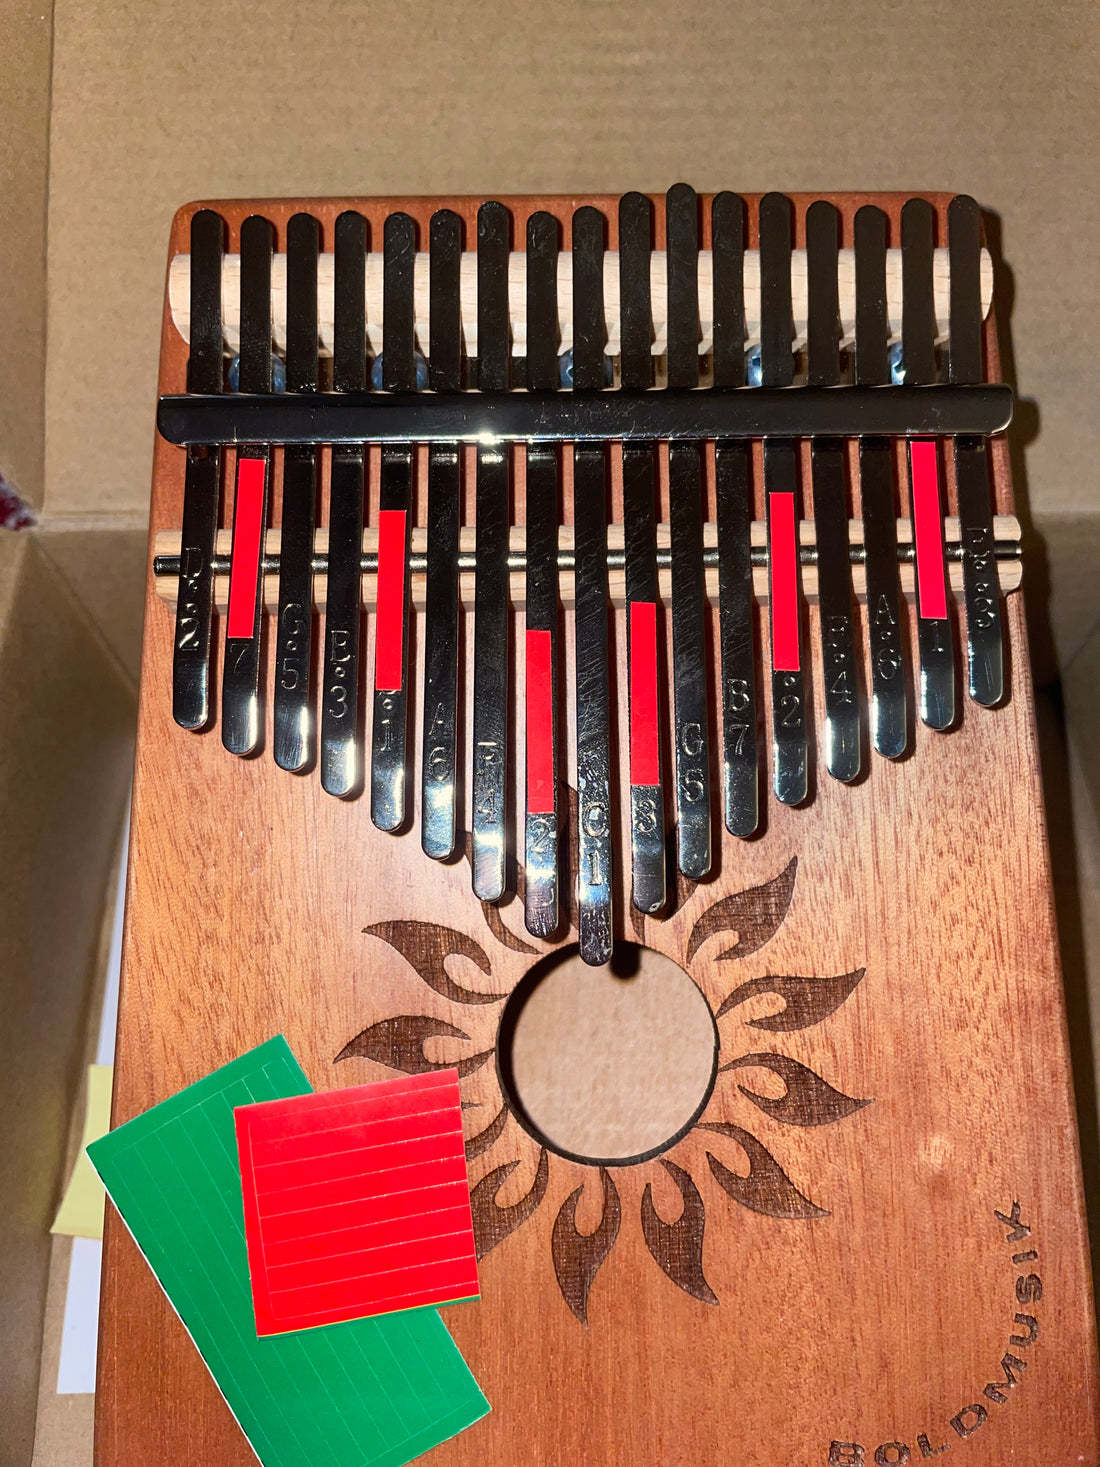 Why Do Many Kalimbas Have Colored Tines?